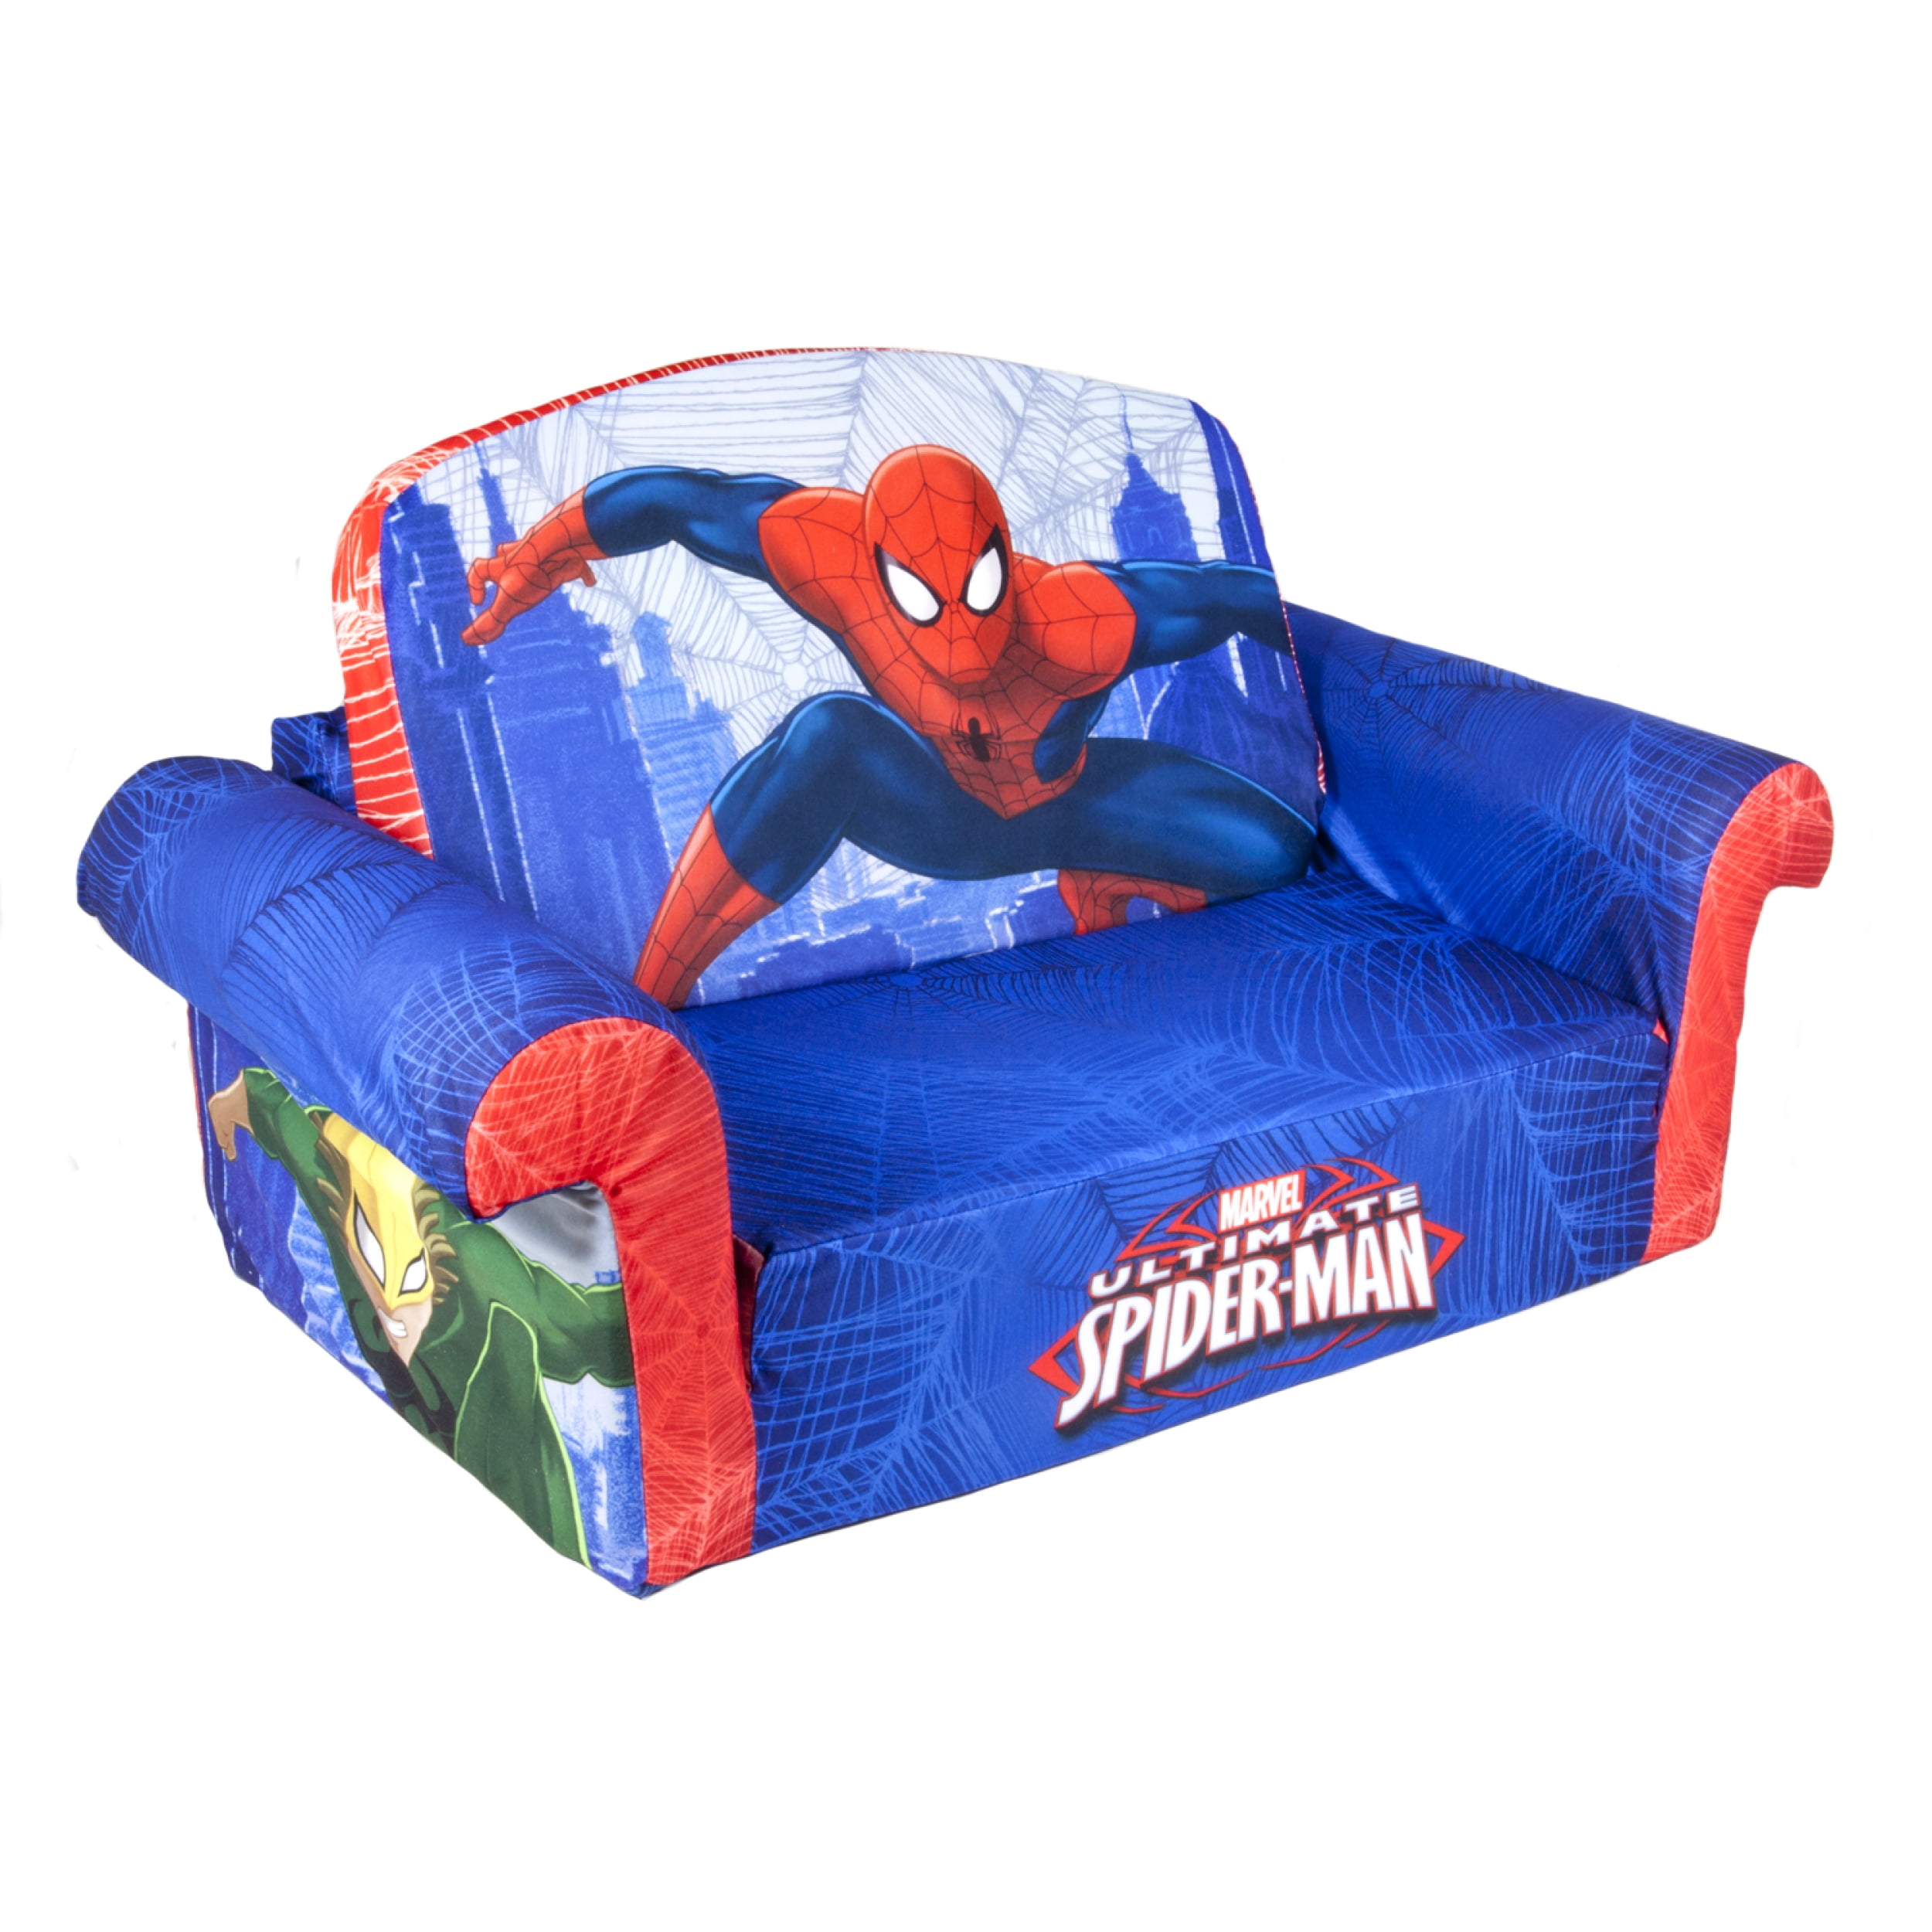 foam couch for kids